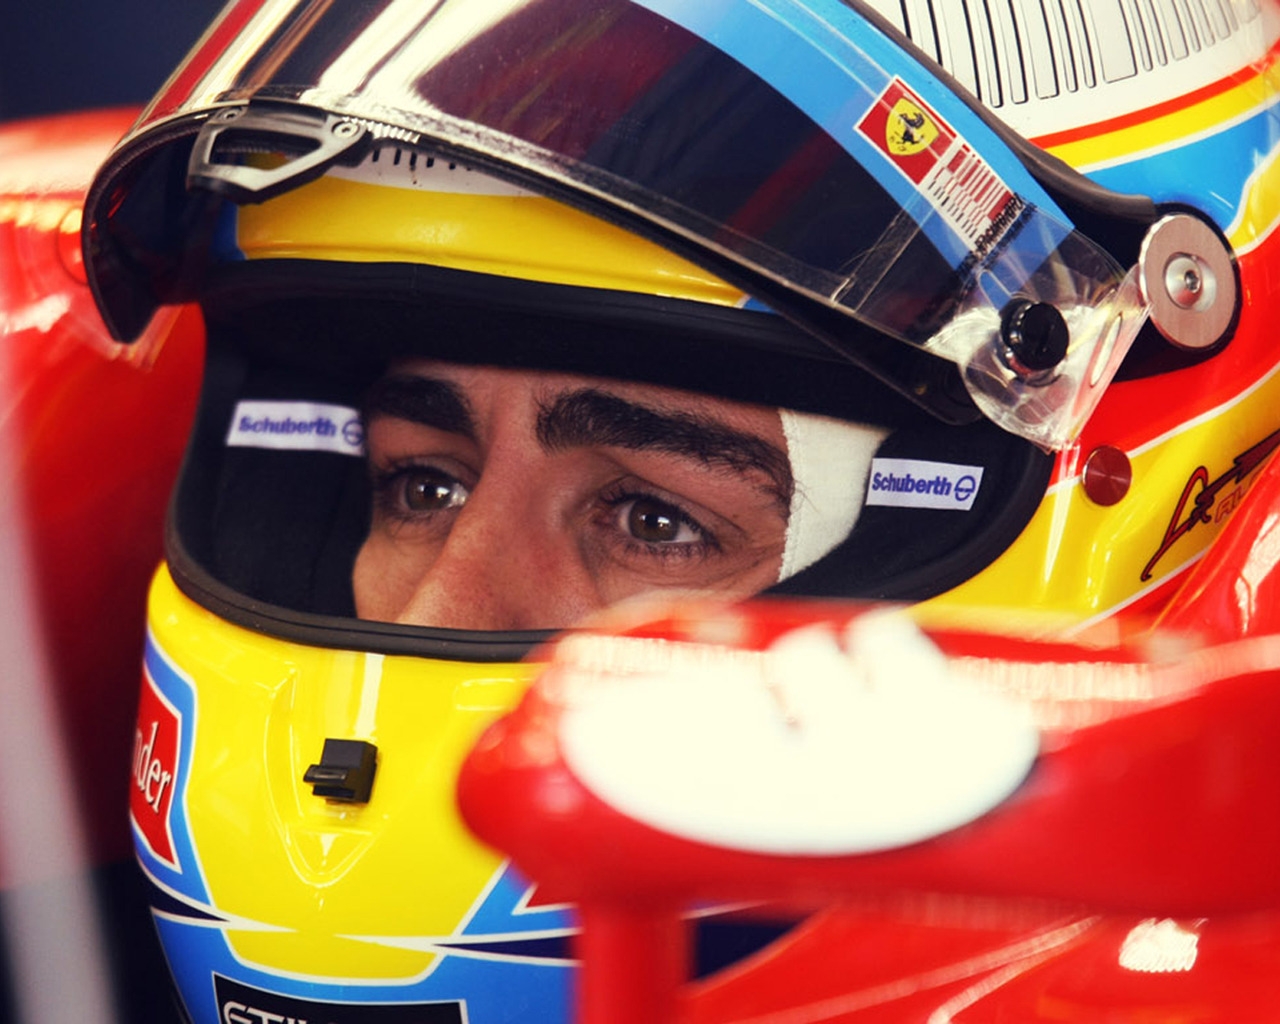 Fernando Alonso Before Race for 1280 x 1024 resolution